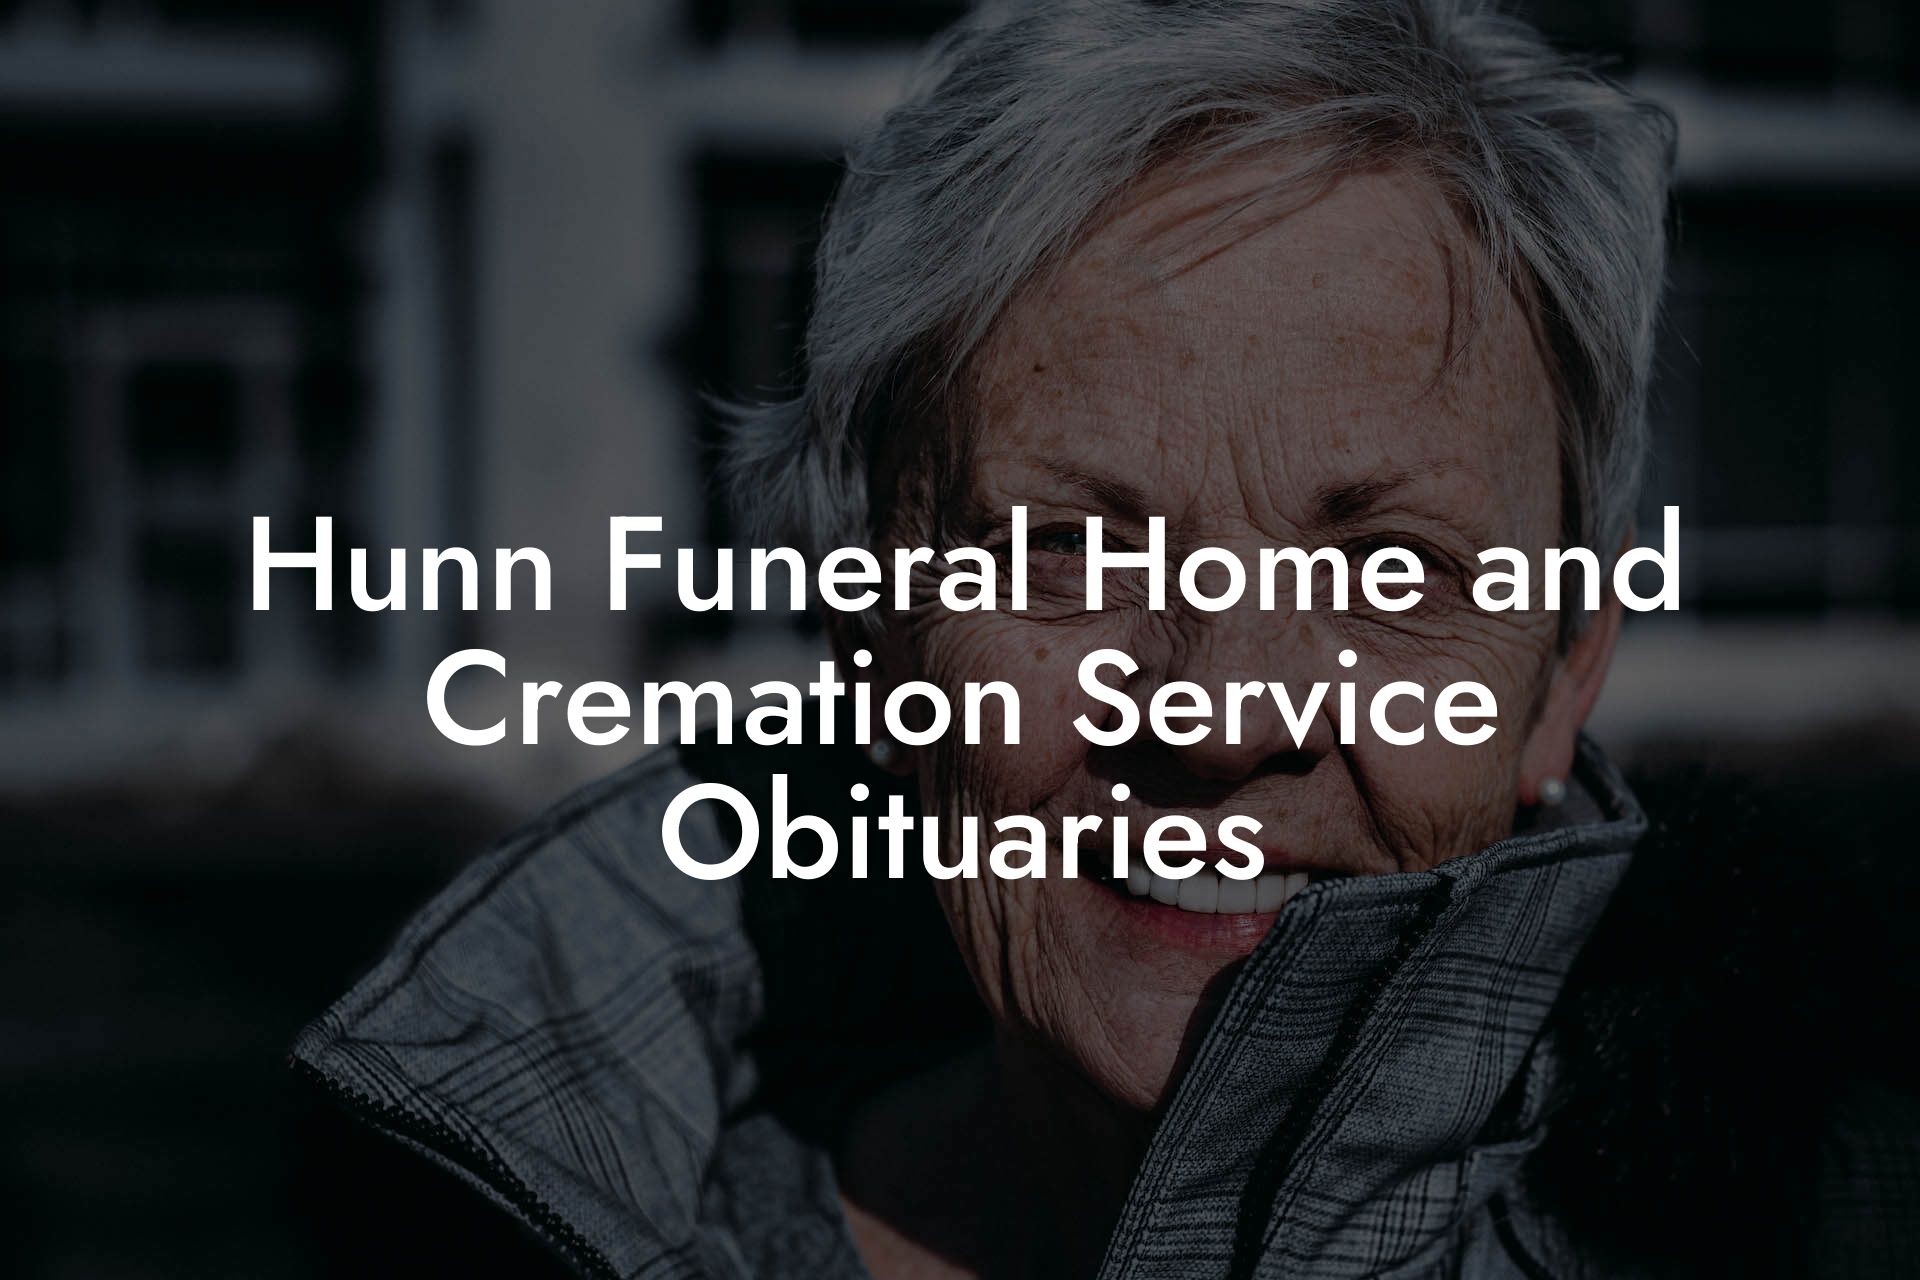 Hunn Funeral Home and Cremation Service Obituaries